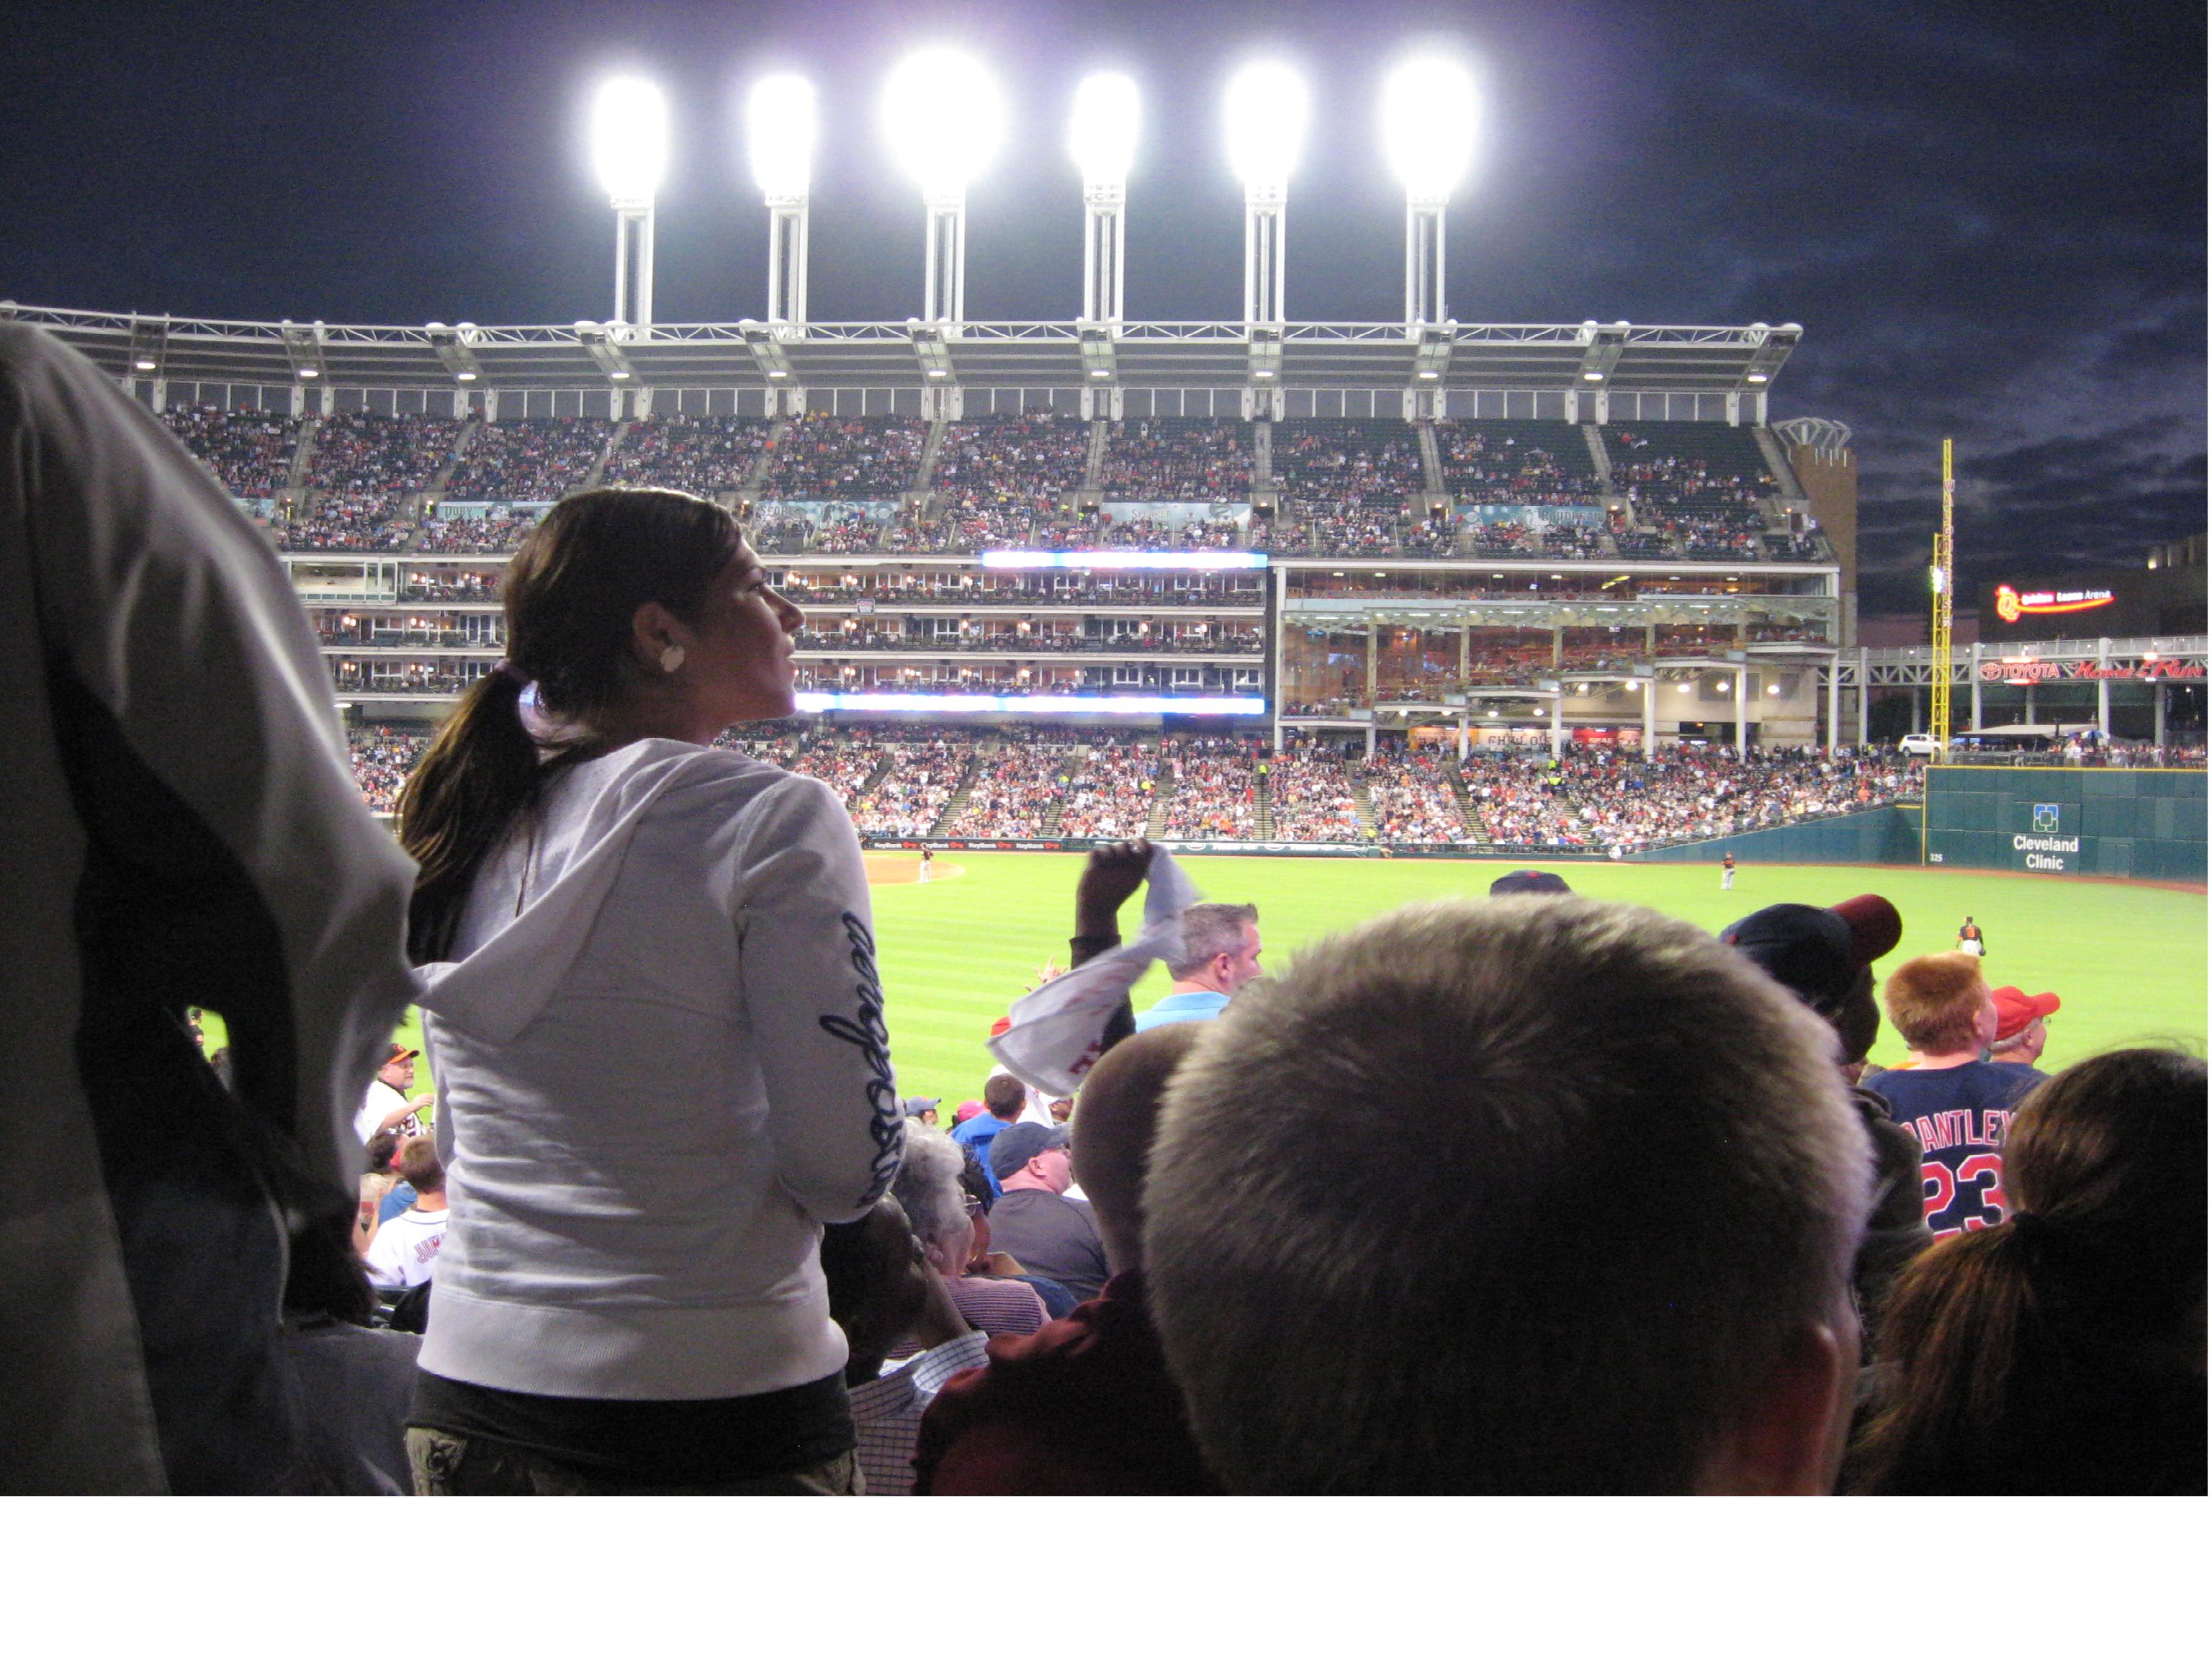  RTA expands service for World Series games, watch parties